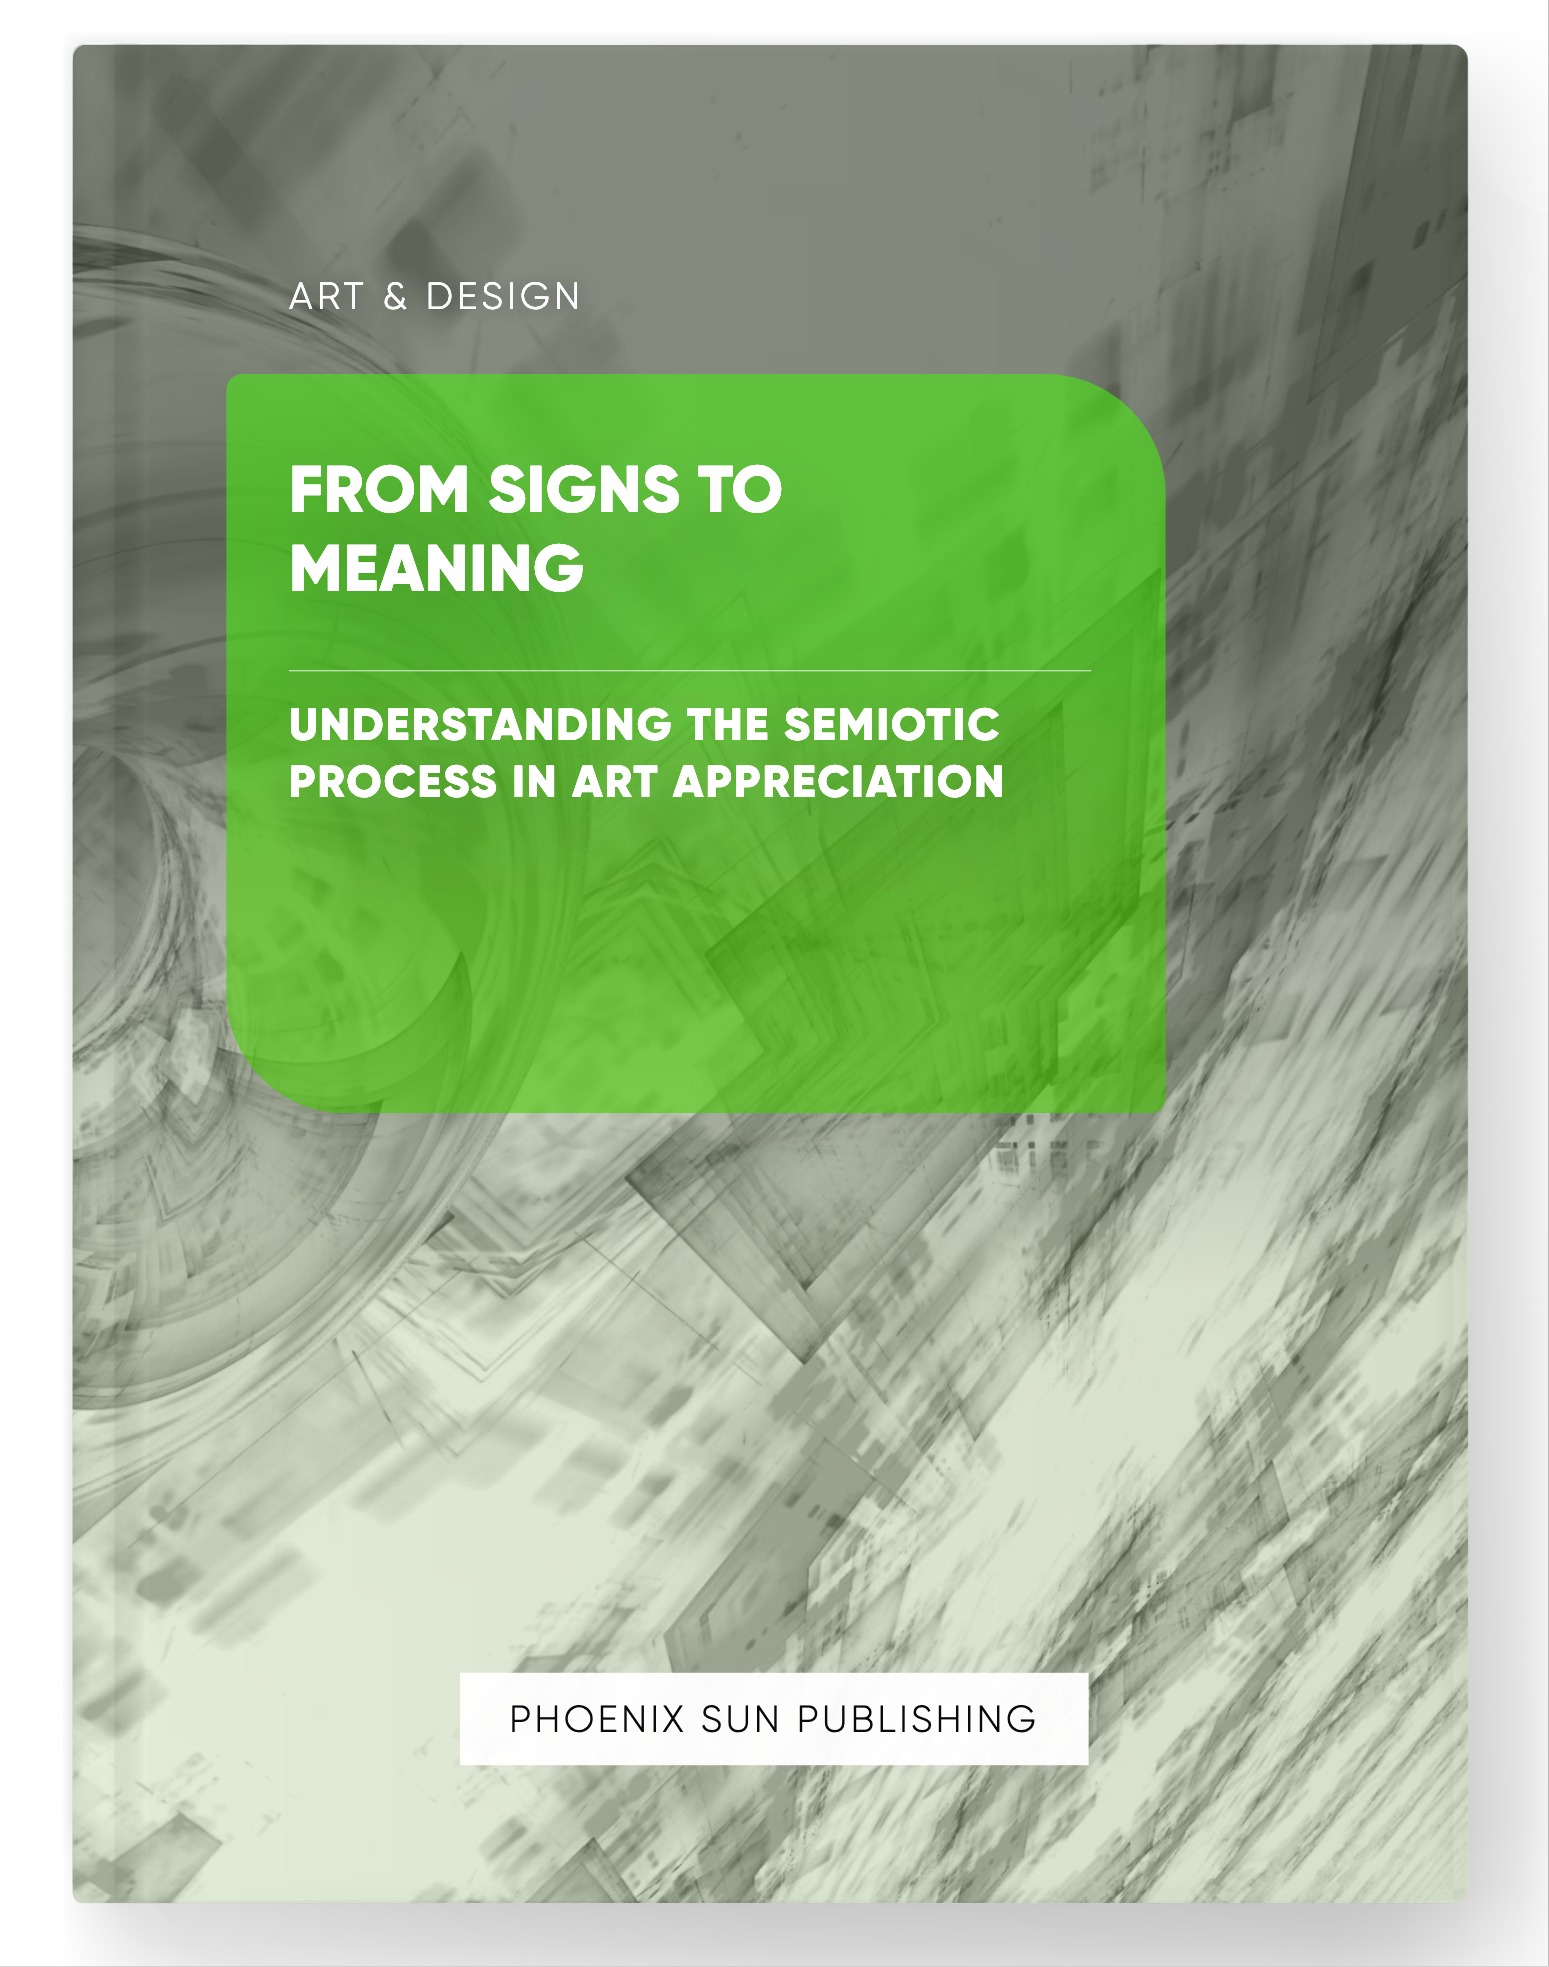 From Signs to Meaning – Understanding the Semiotic Process in Art Appreciation